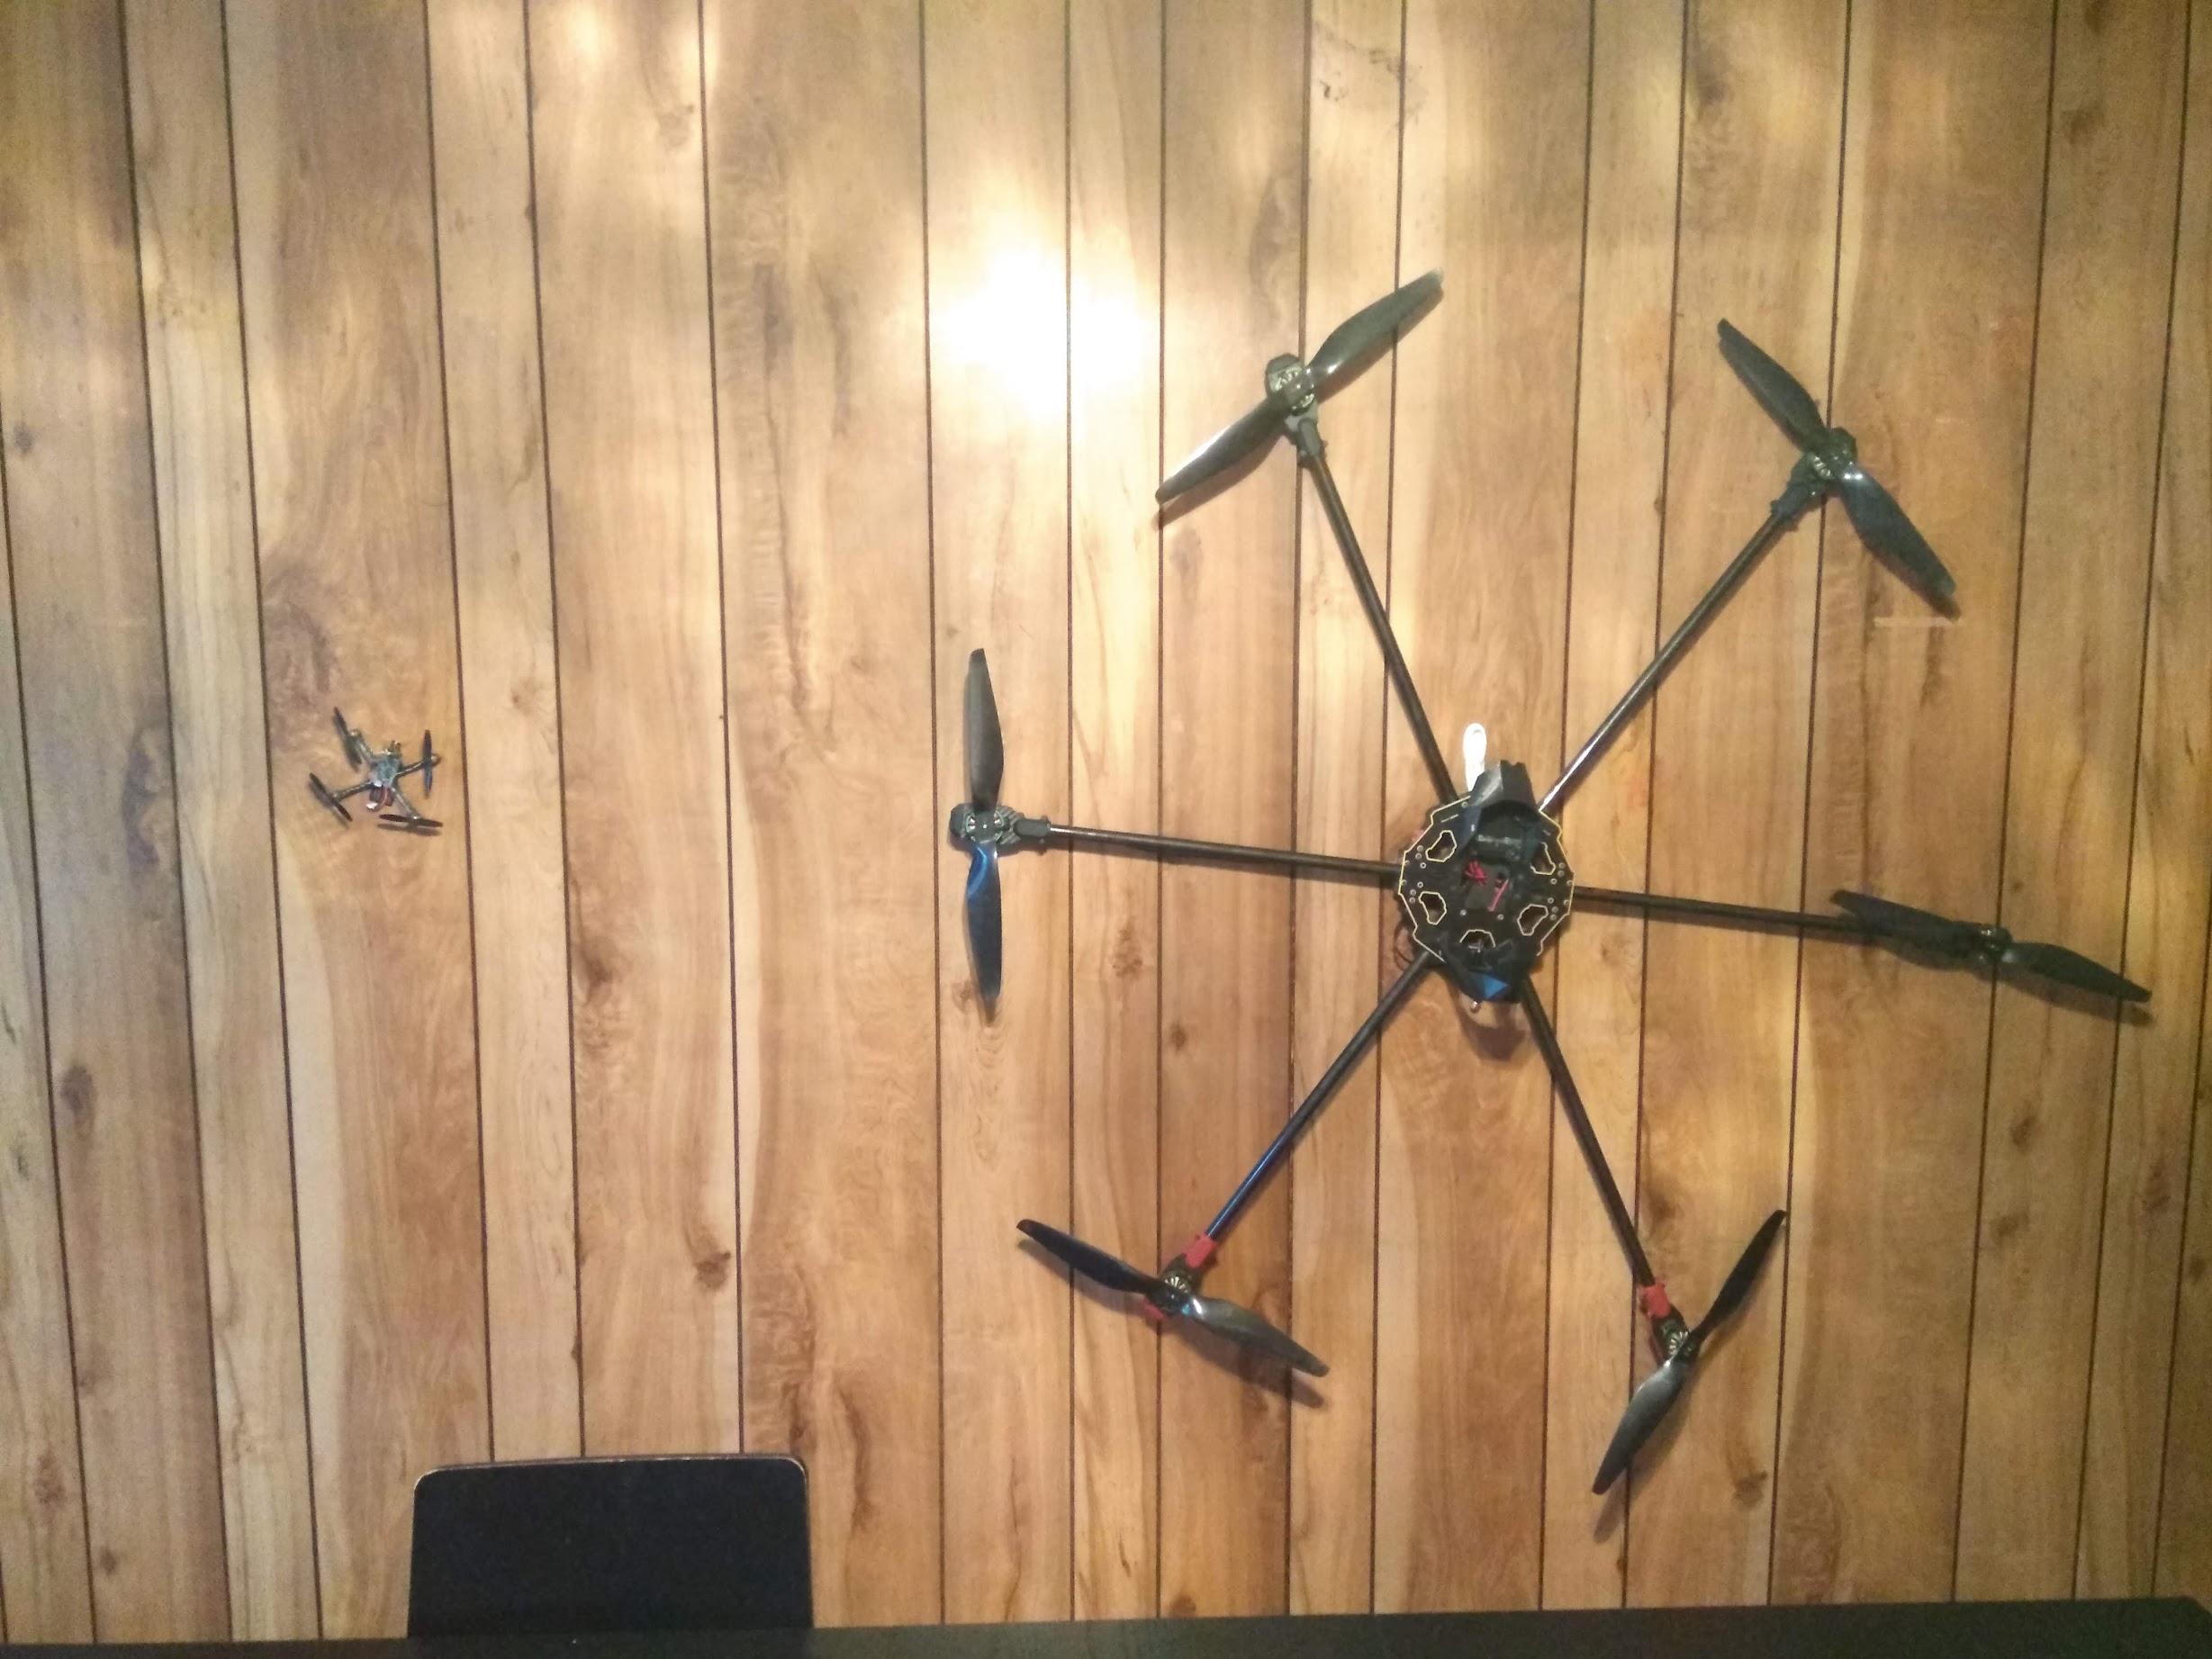 Drone chassis as a wall decoration, next to a 90mm drone for scale.